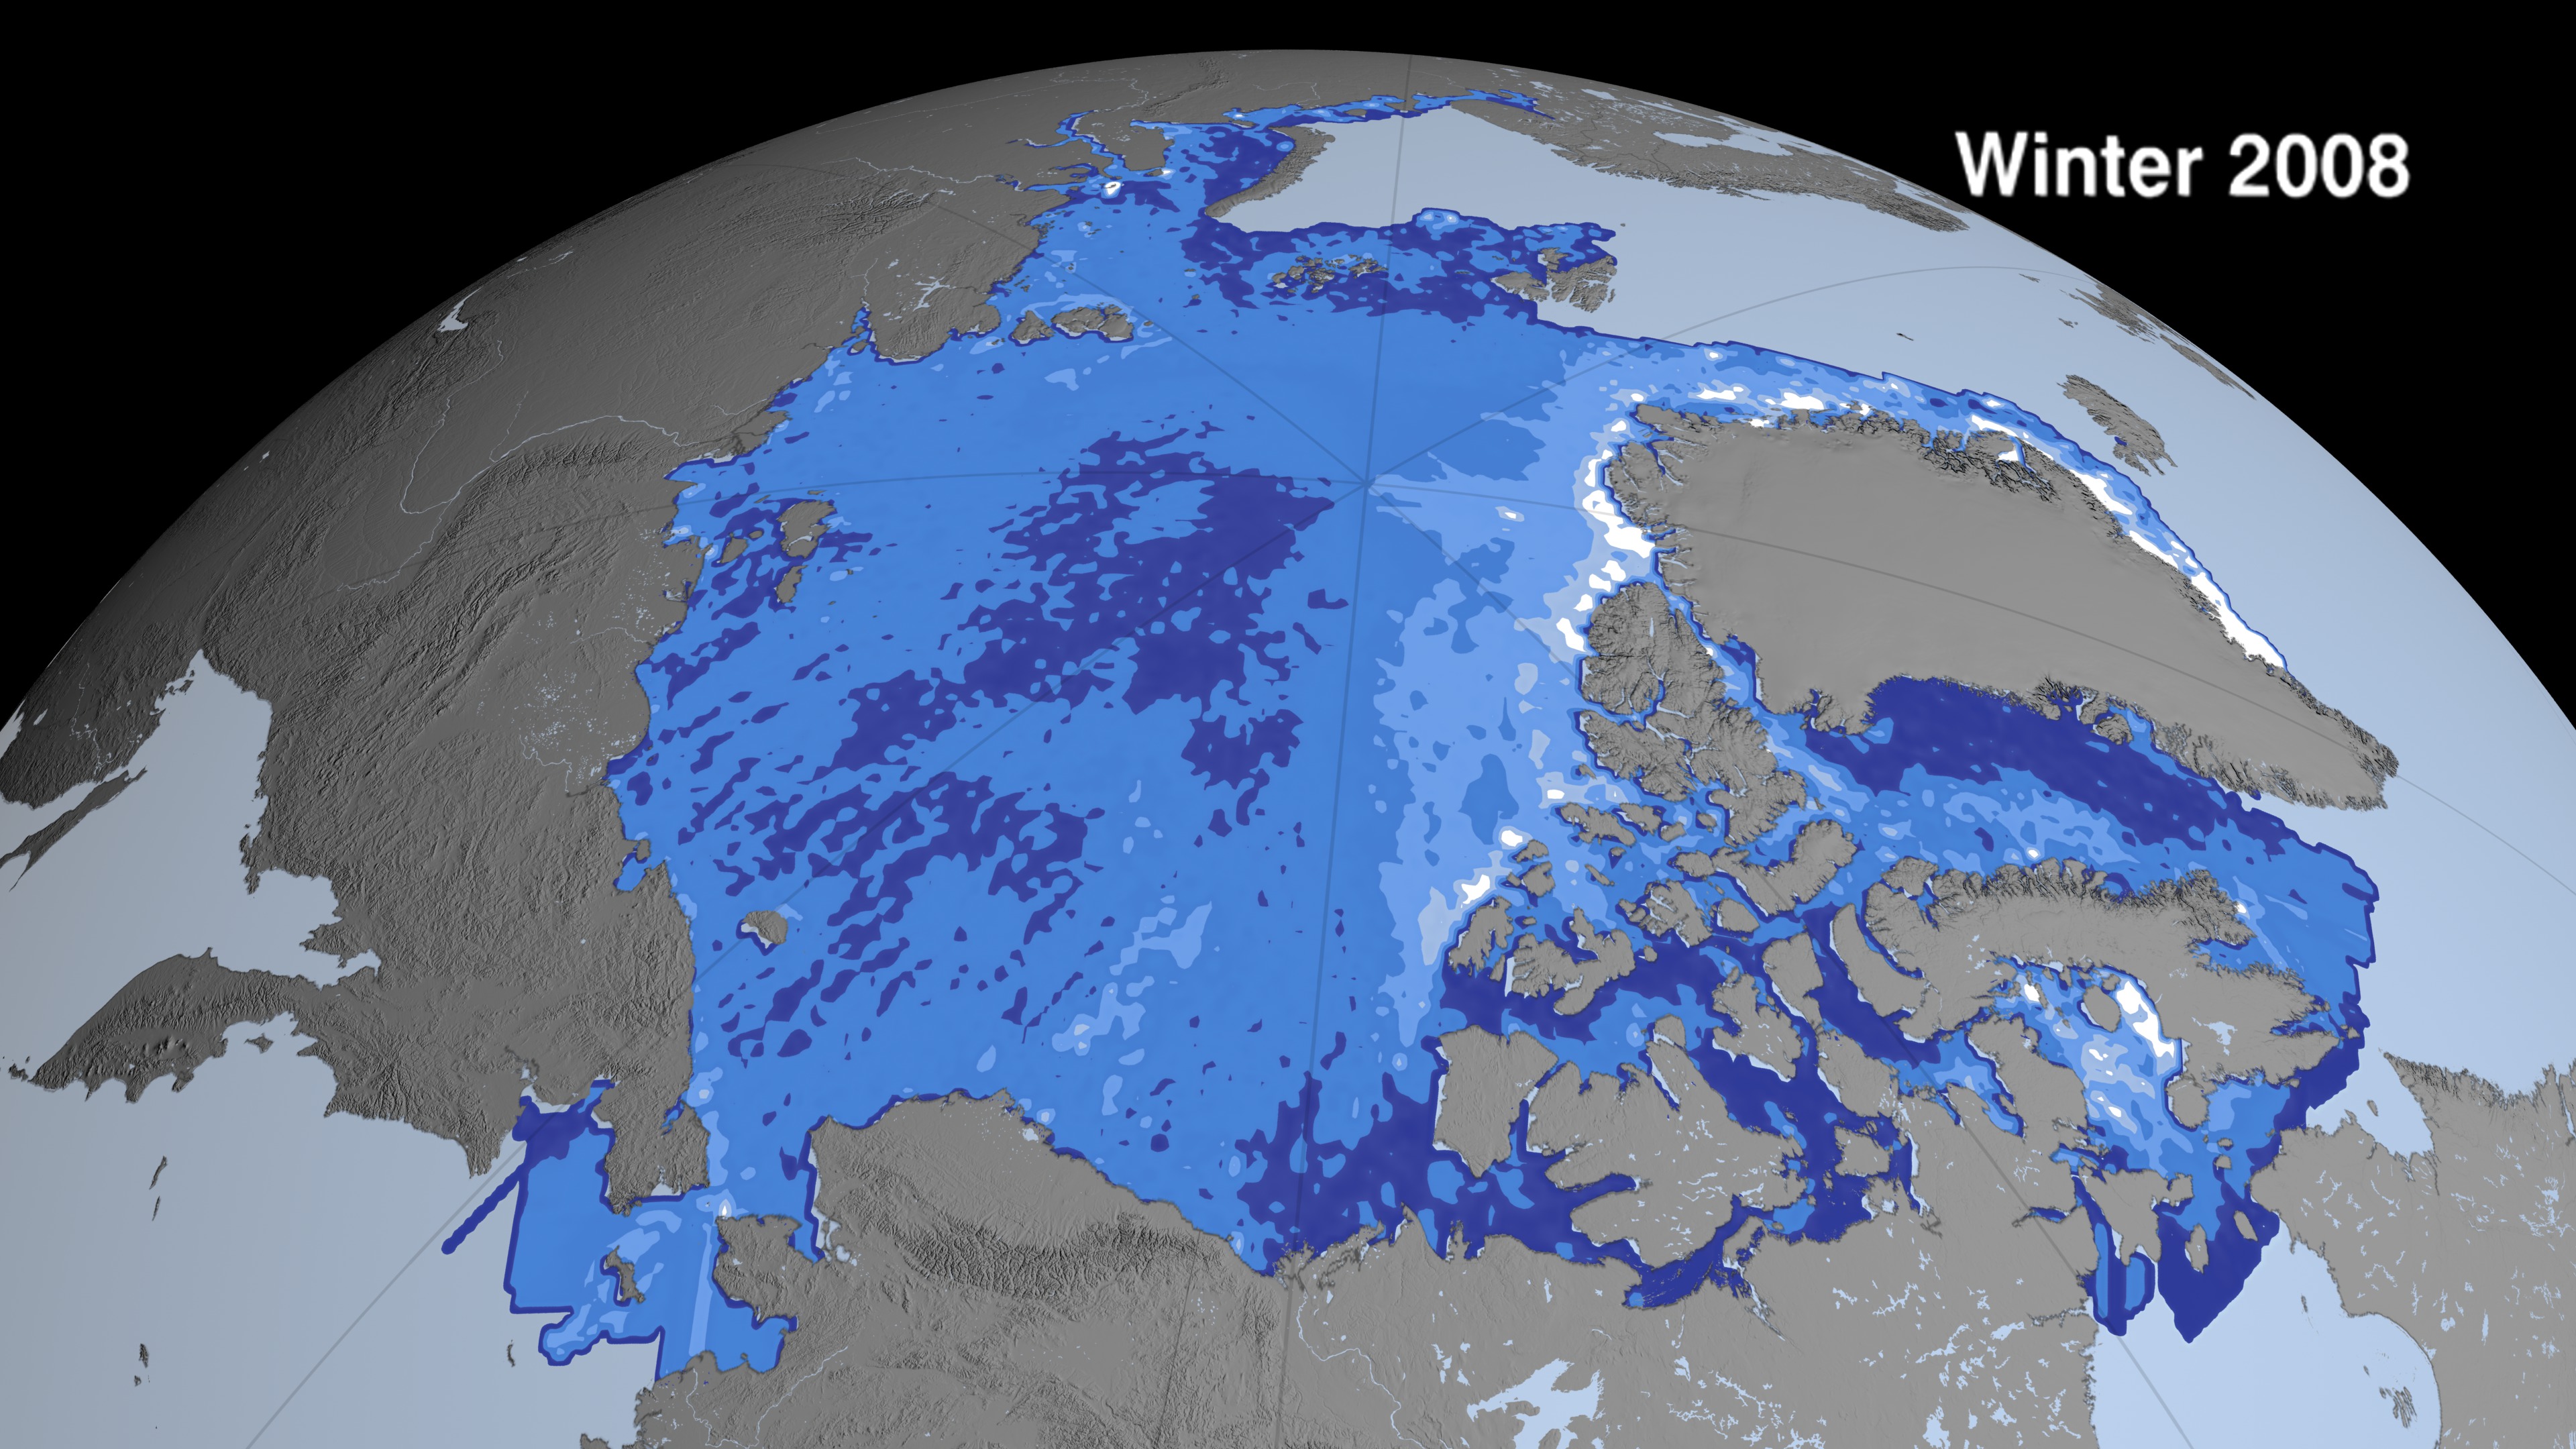 This sequence shows Arctic sea ice thickness derived from winter campaigns from the ICESat satellite. While the sea ice extent might look similar from year to year this thickness data shows dramatic thinning especially near the North Pole (shown in dark blue). This image was generated with data acquired between Feb 17 - Mar 21, 2008.